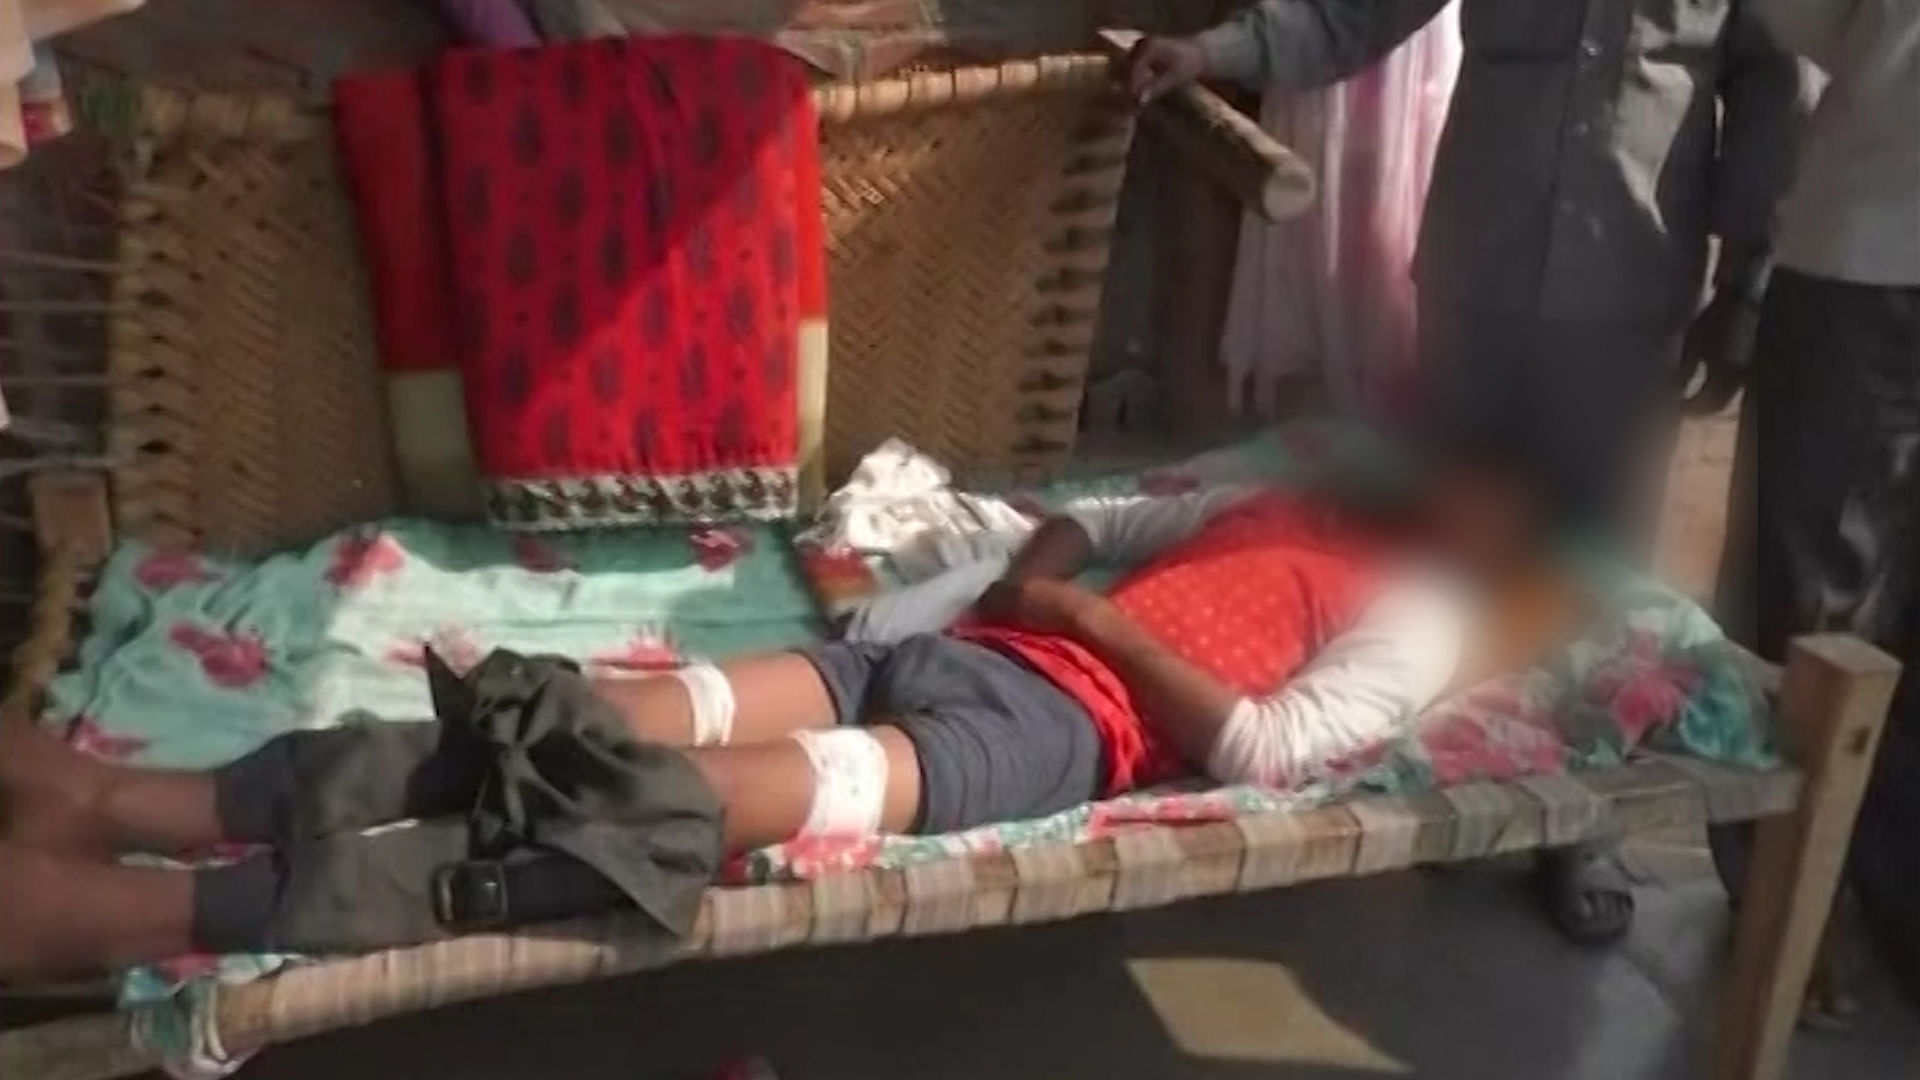 Class 11 Student suffered cuts on both legs